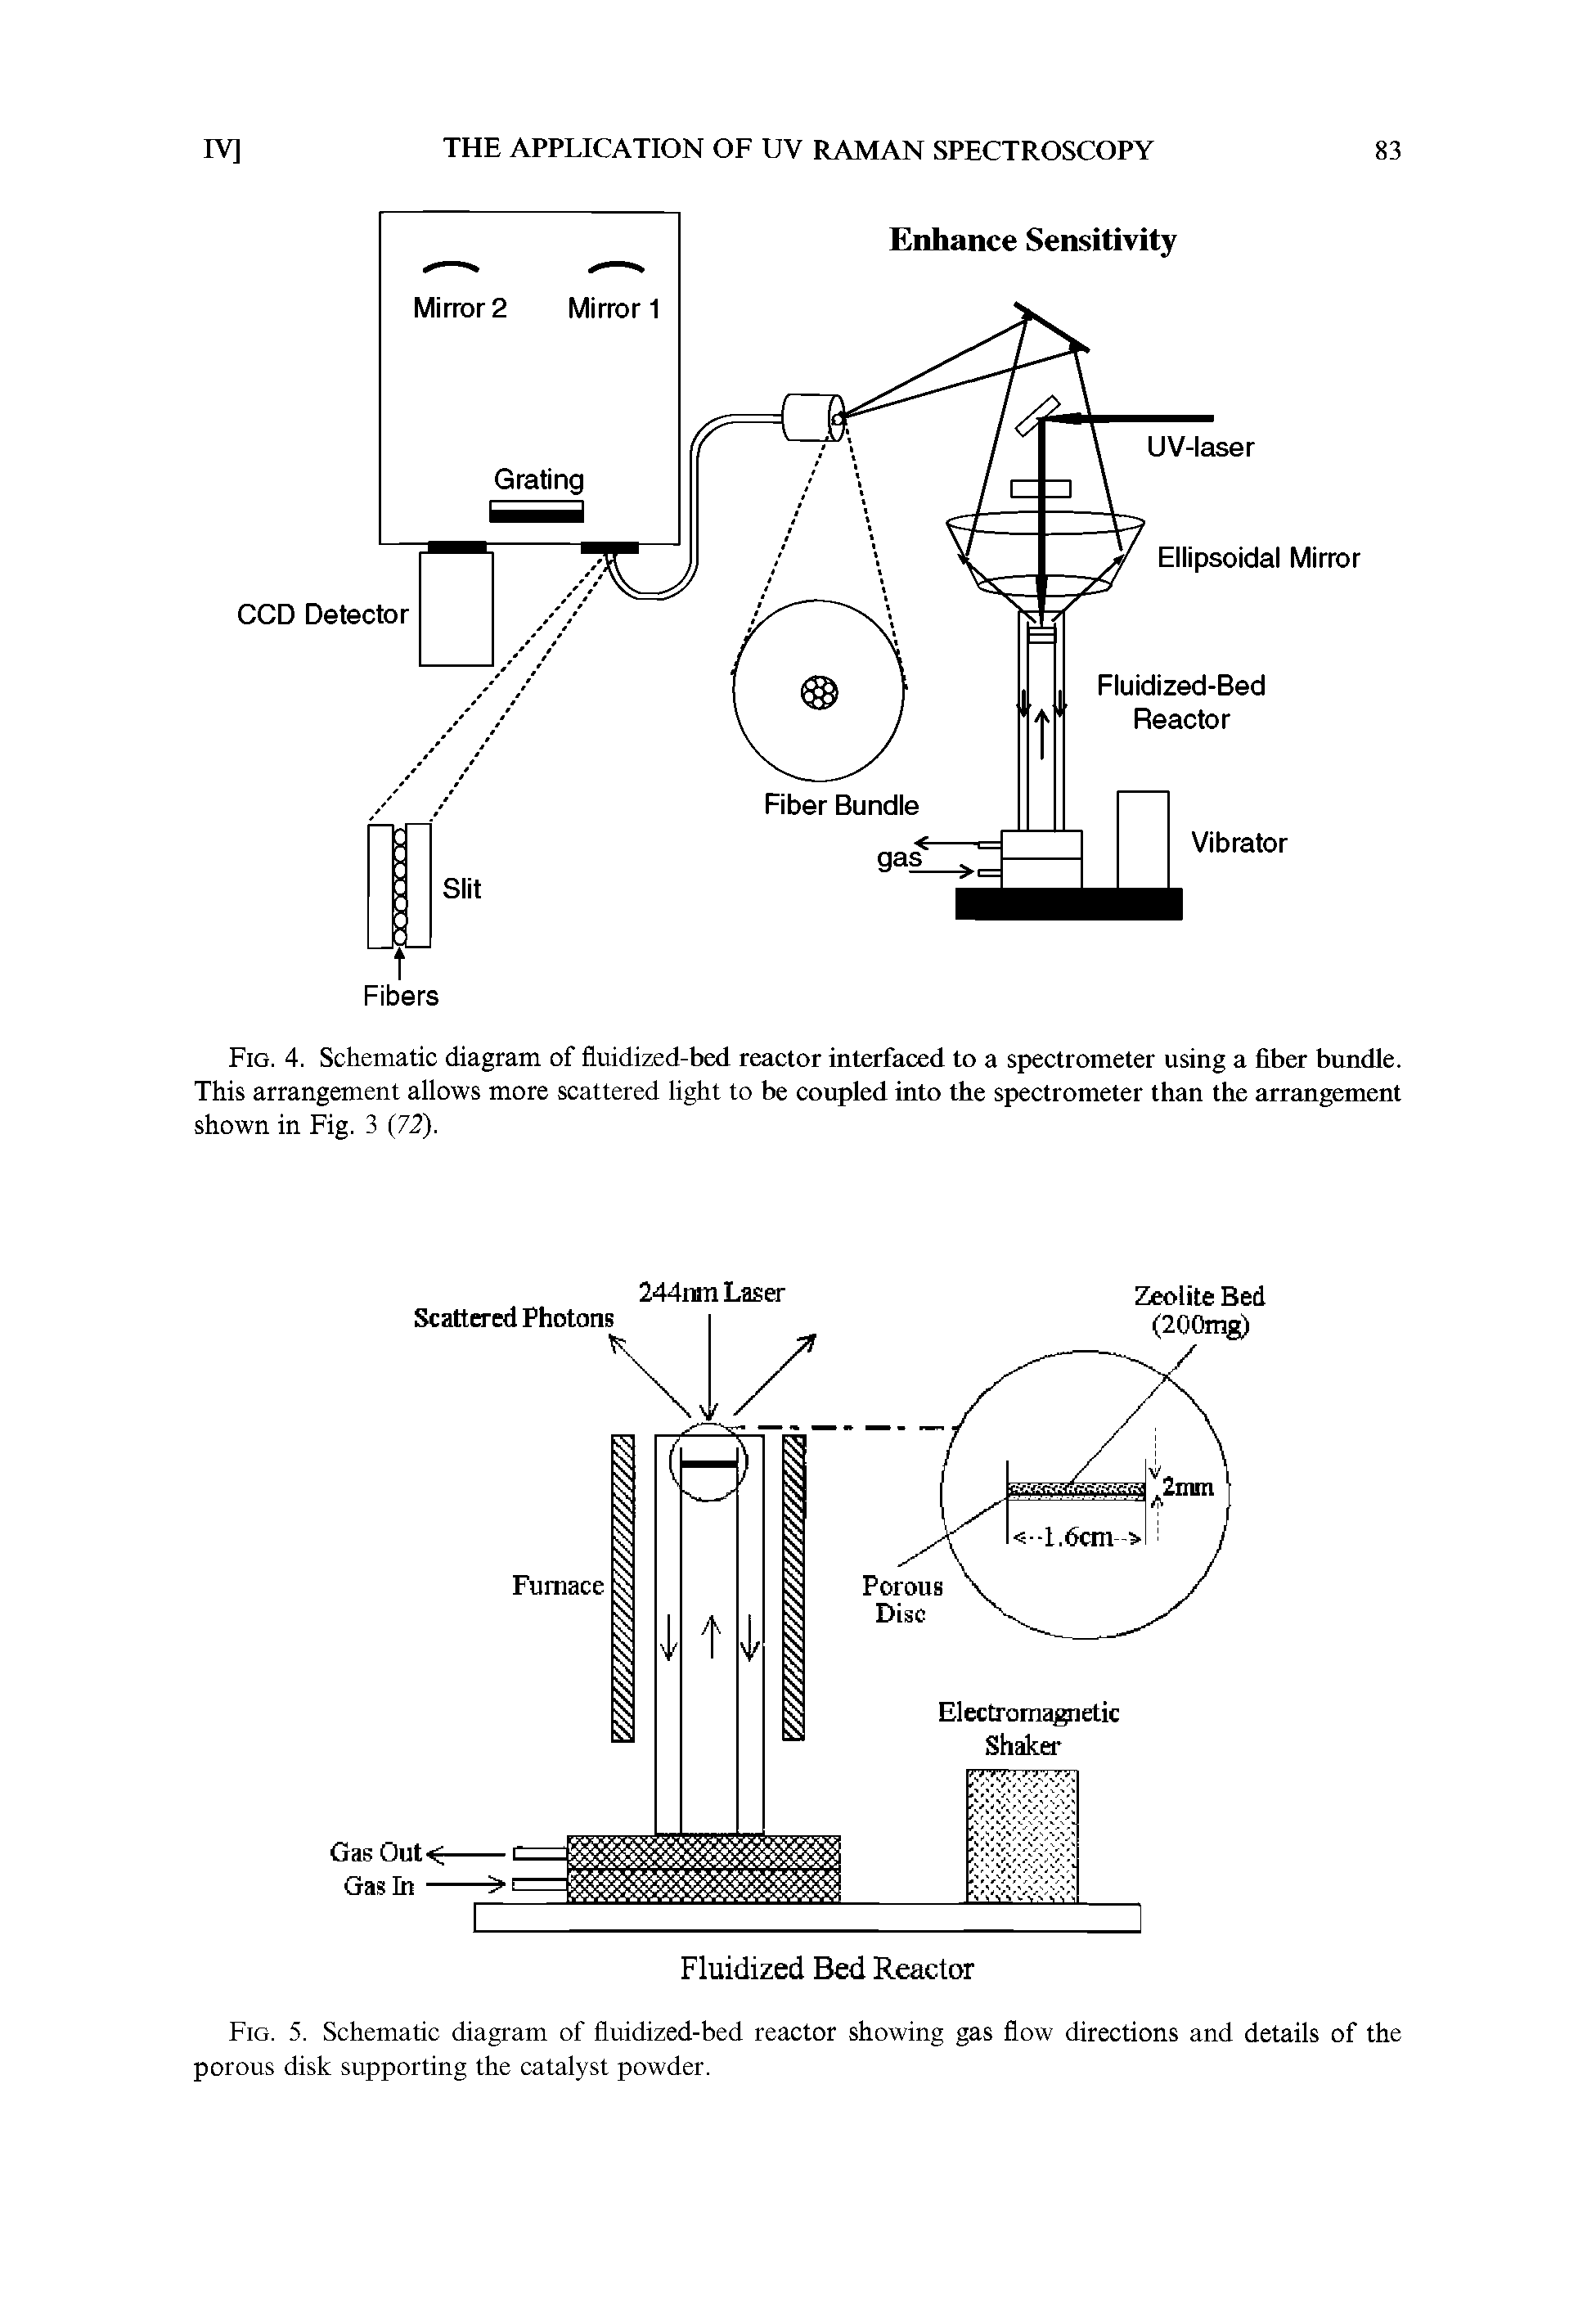 Fig. 5. Schematic diagram of fluidized-bed reactor showing gas flow directions and details of the porous disk supporting the catalyst powder.